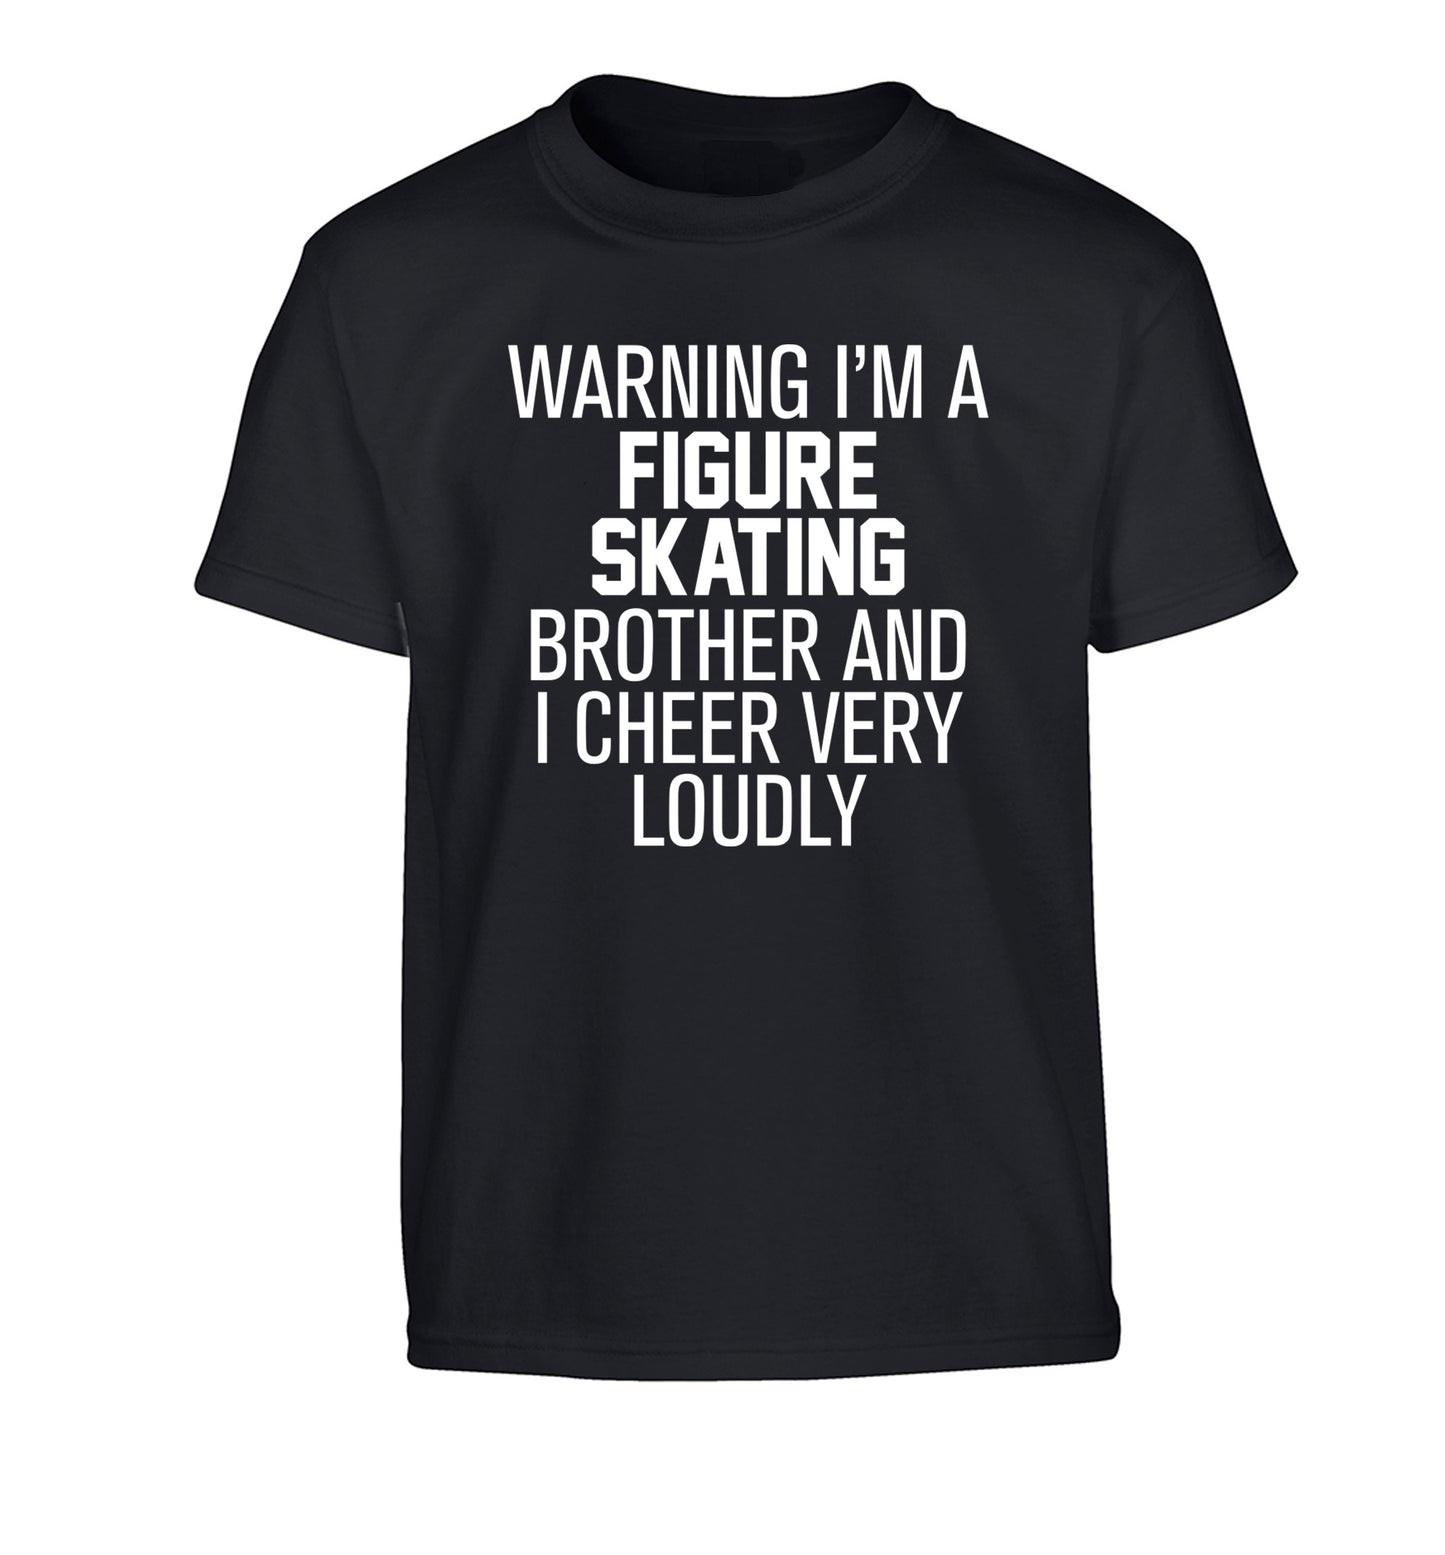 Warning I'm a figure skating brother and I cheer very loudly Children's black Tshirt 12-14 Years